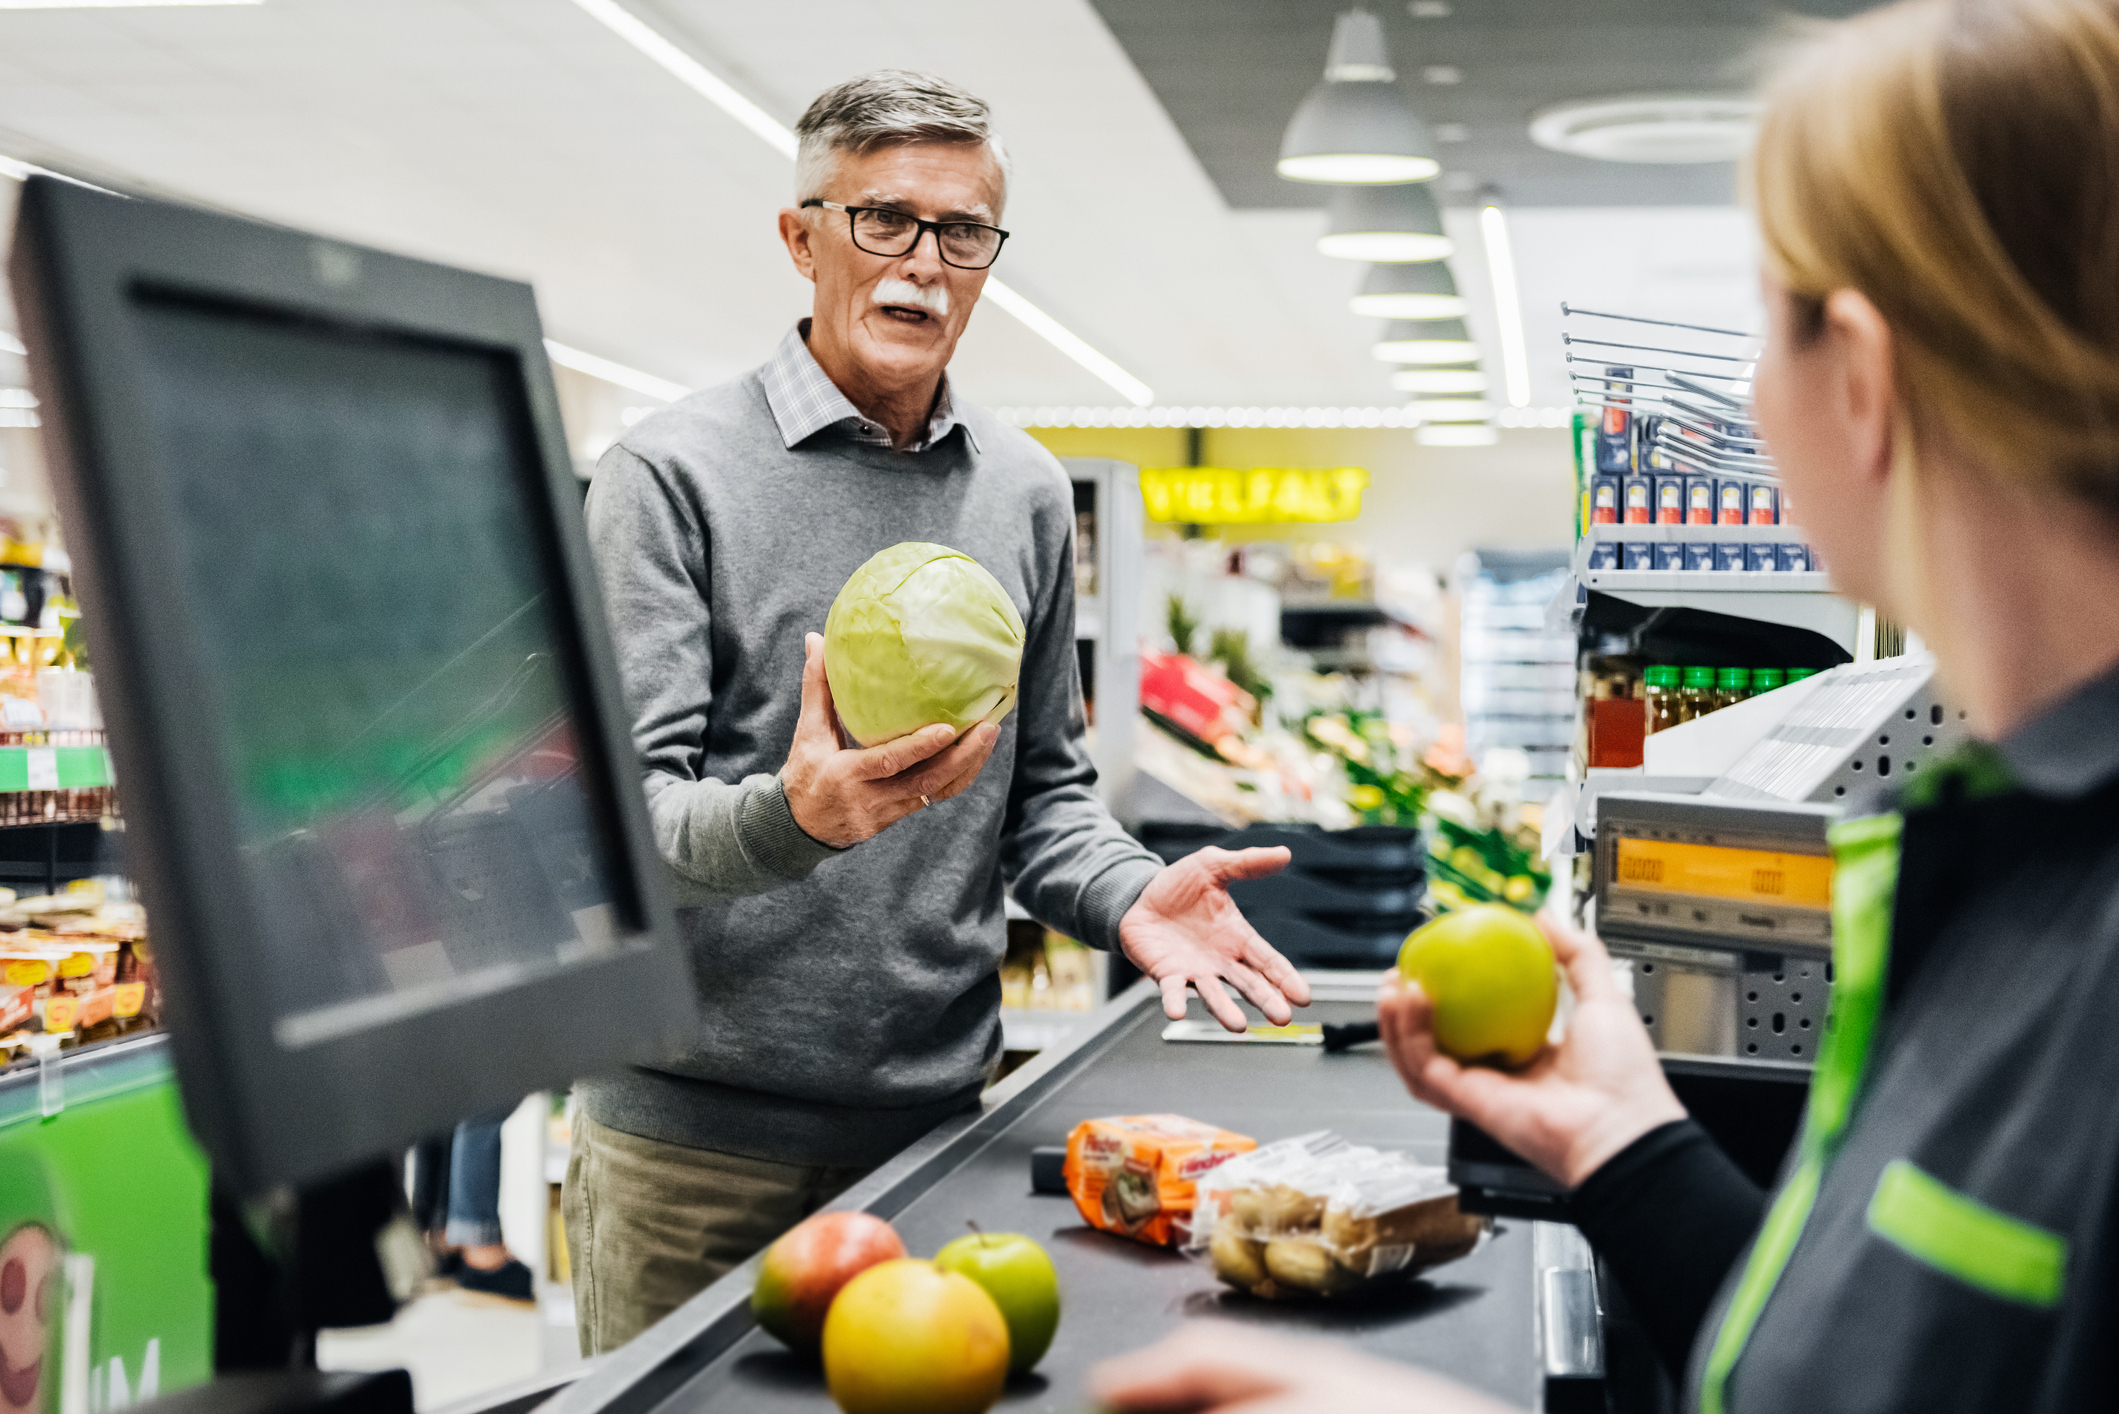 A man in the checkout counter holding up vegetables